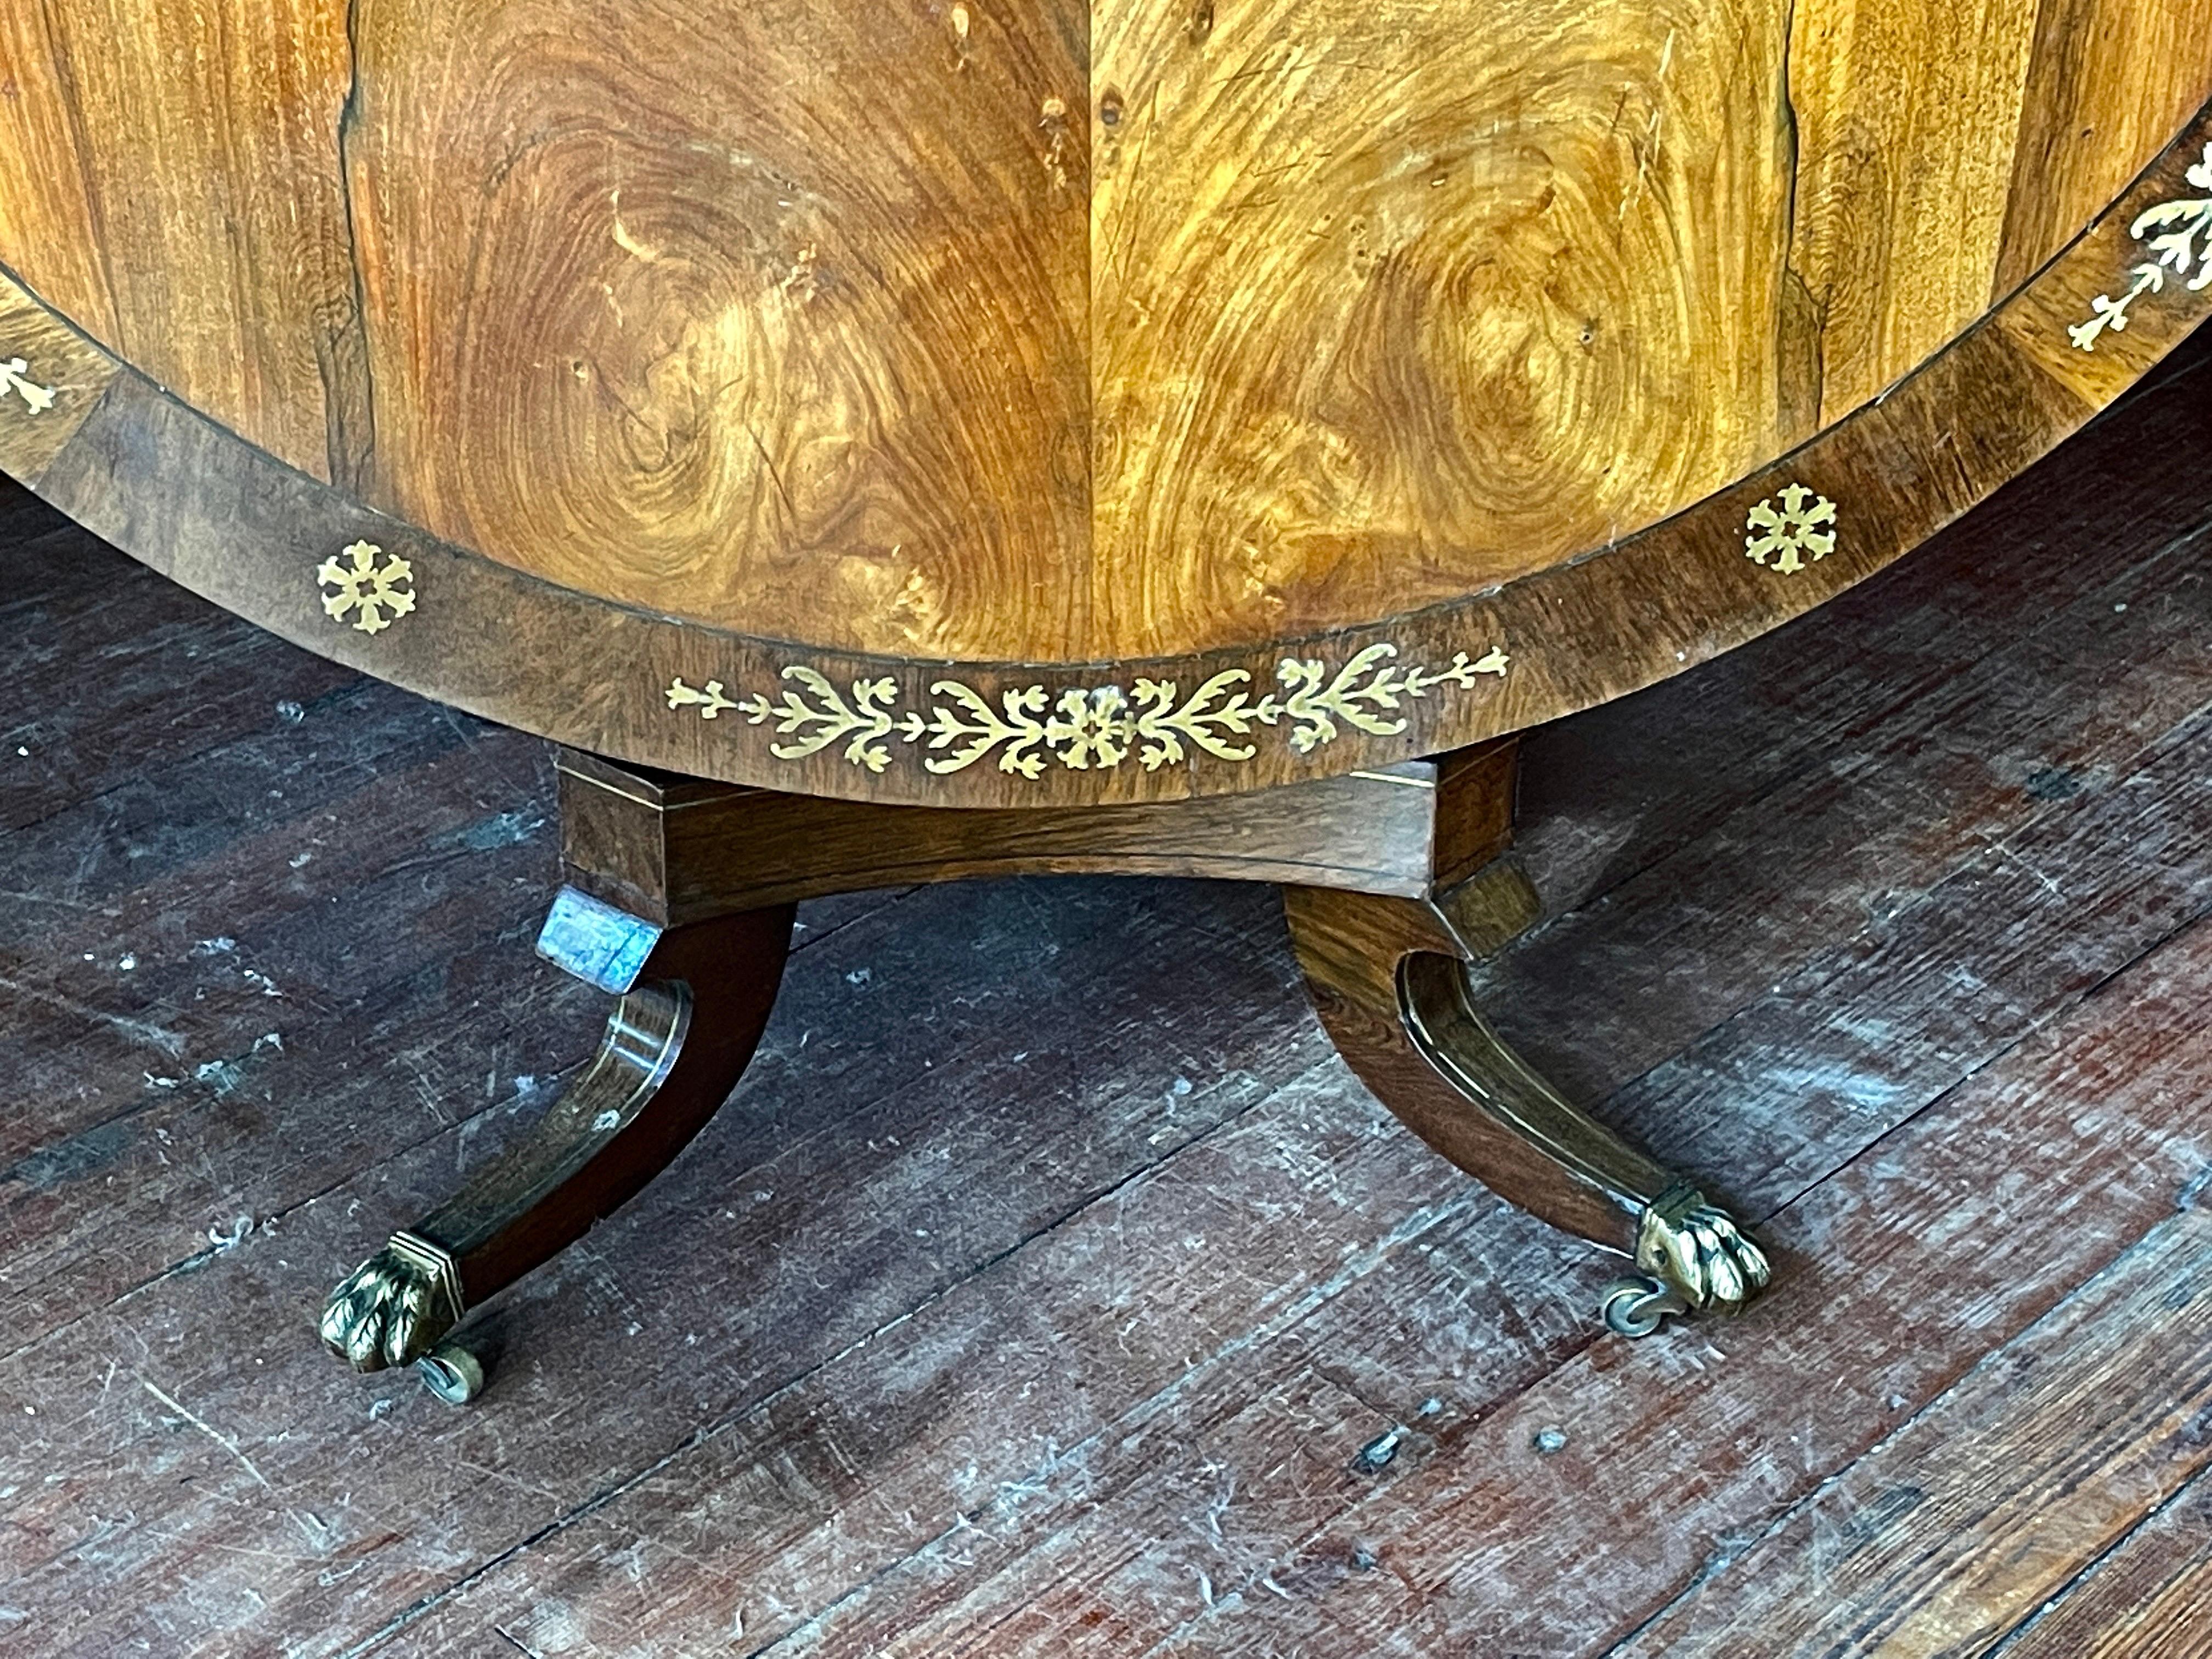 An extraordinary Antique English period Regency brass inlaid Rosewood Circular Tilt-Top Center or Dining Table with a walnut crossbanding. Please note the exceptional hand cut brass inlay around the walnut crossbanded border and the fabulous